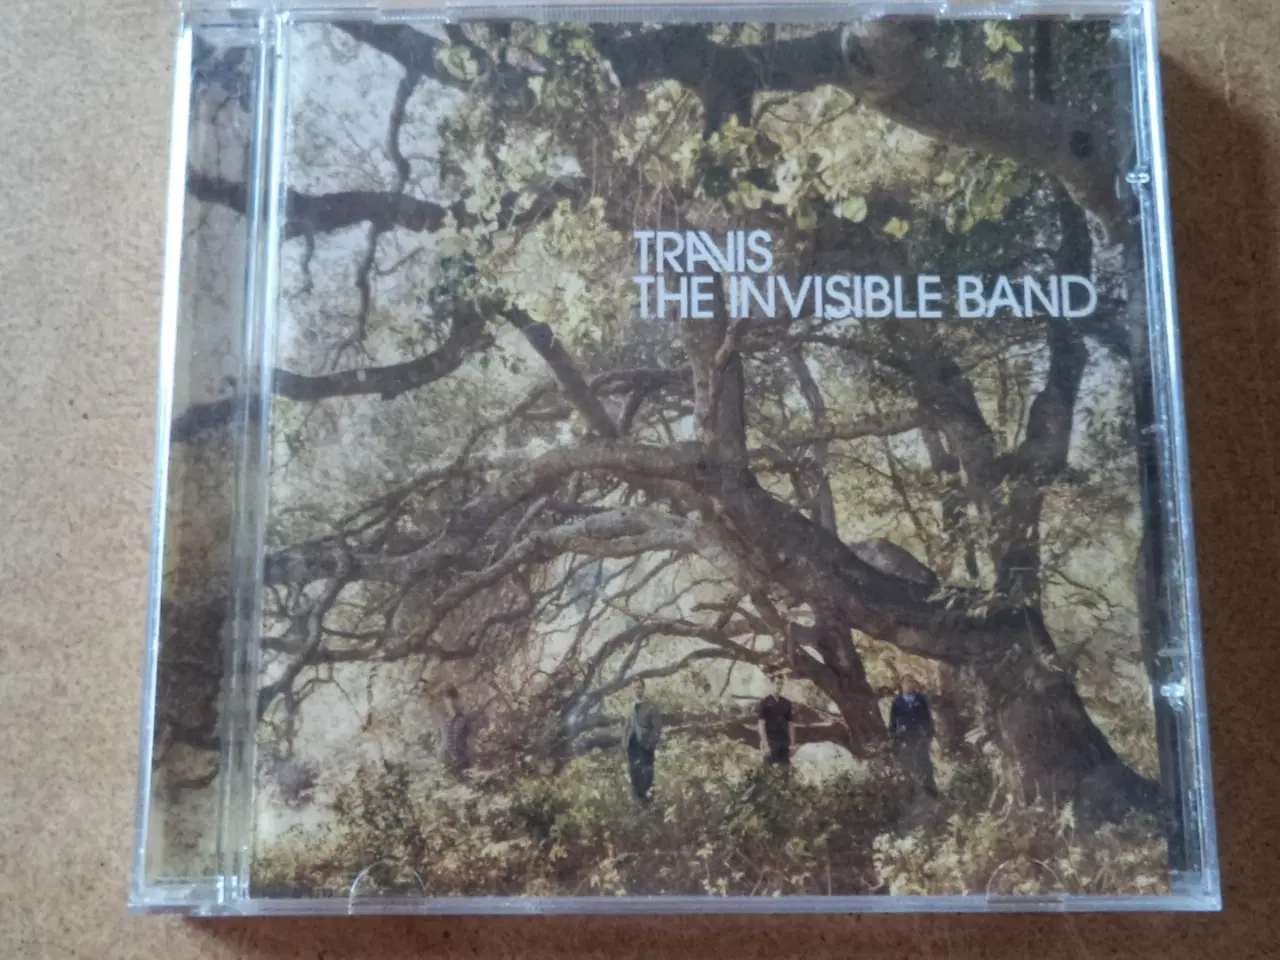 Billede 1 - Travis ** The Invisible Band                      